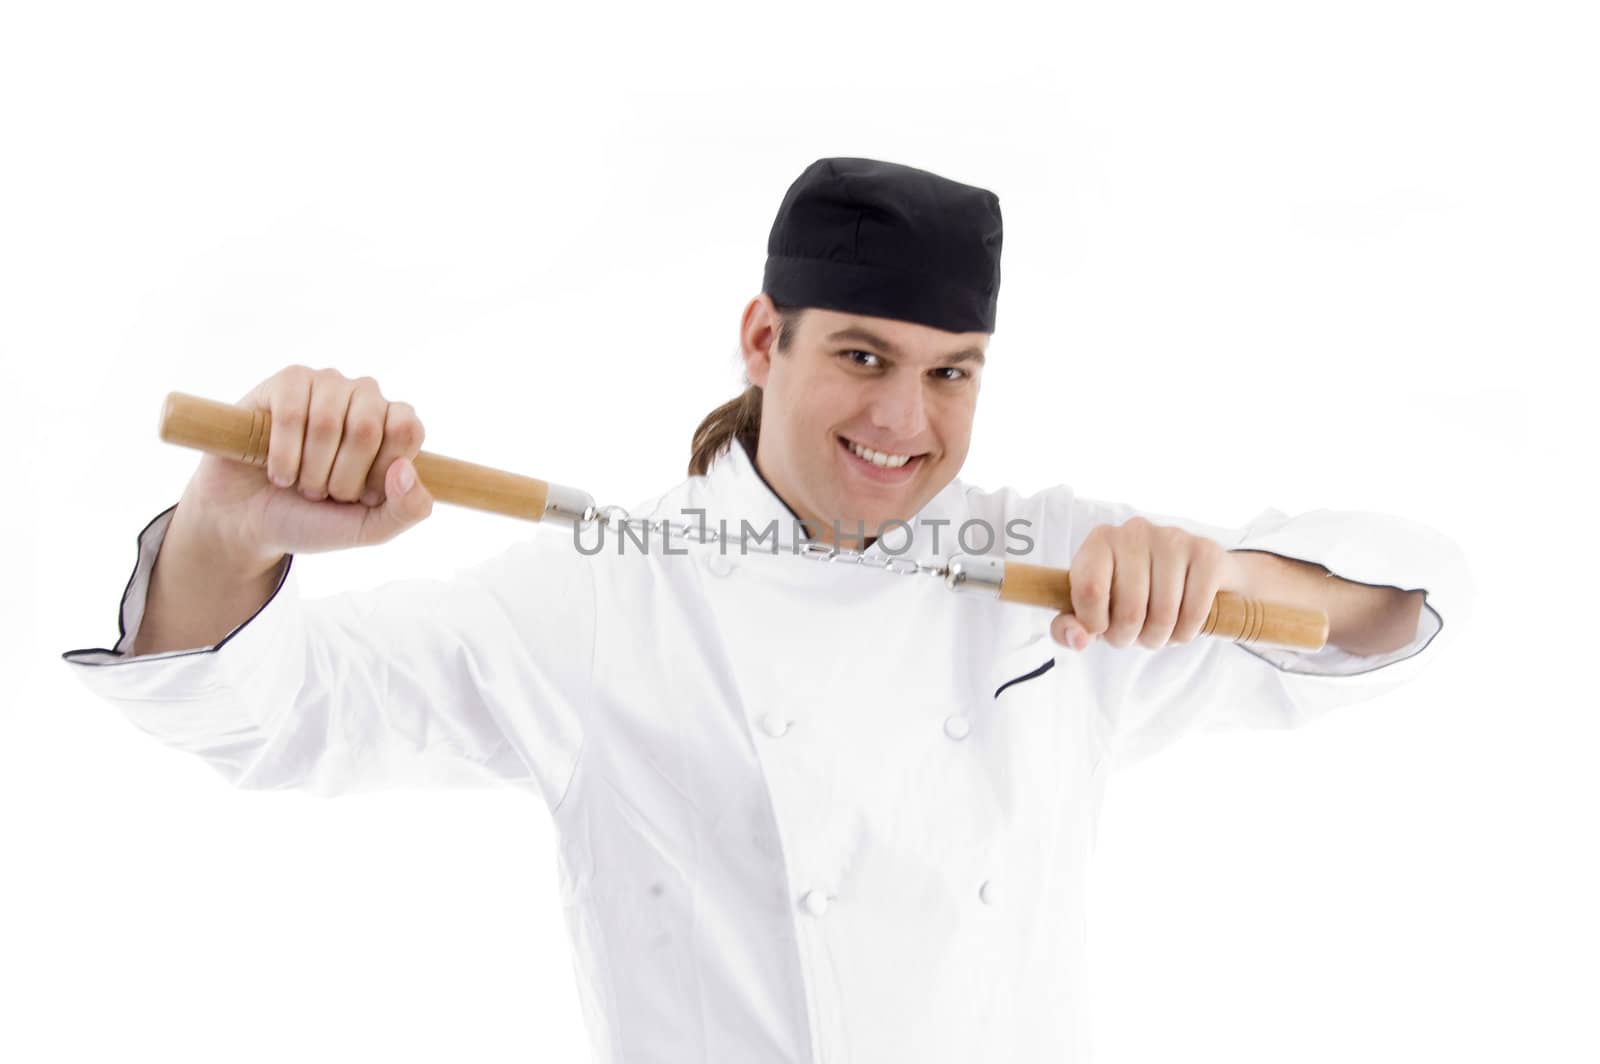 chef posing holding nunchaku on an isolated white background